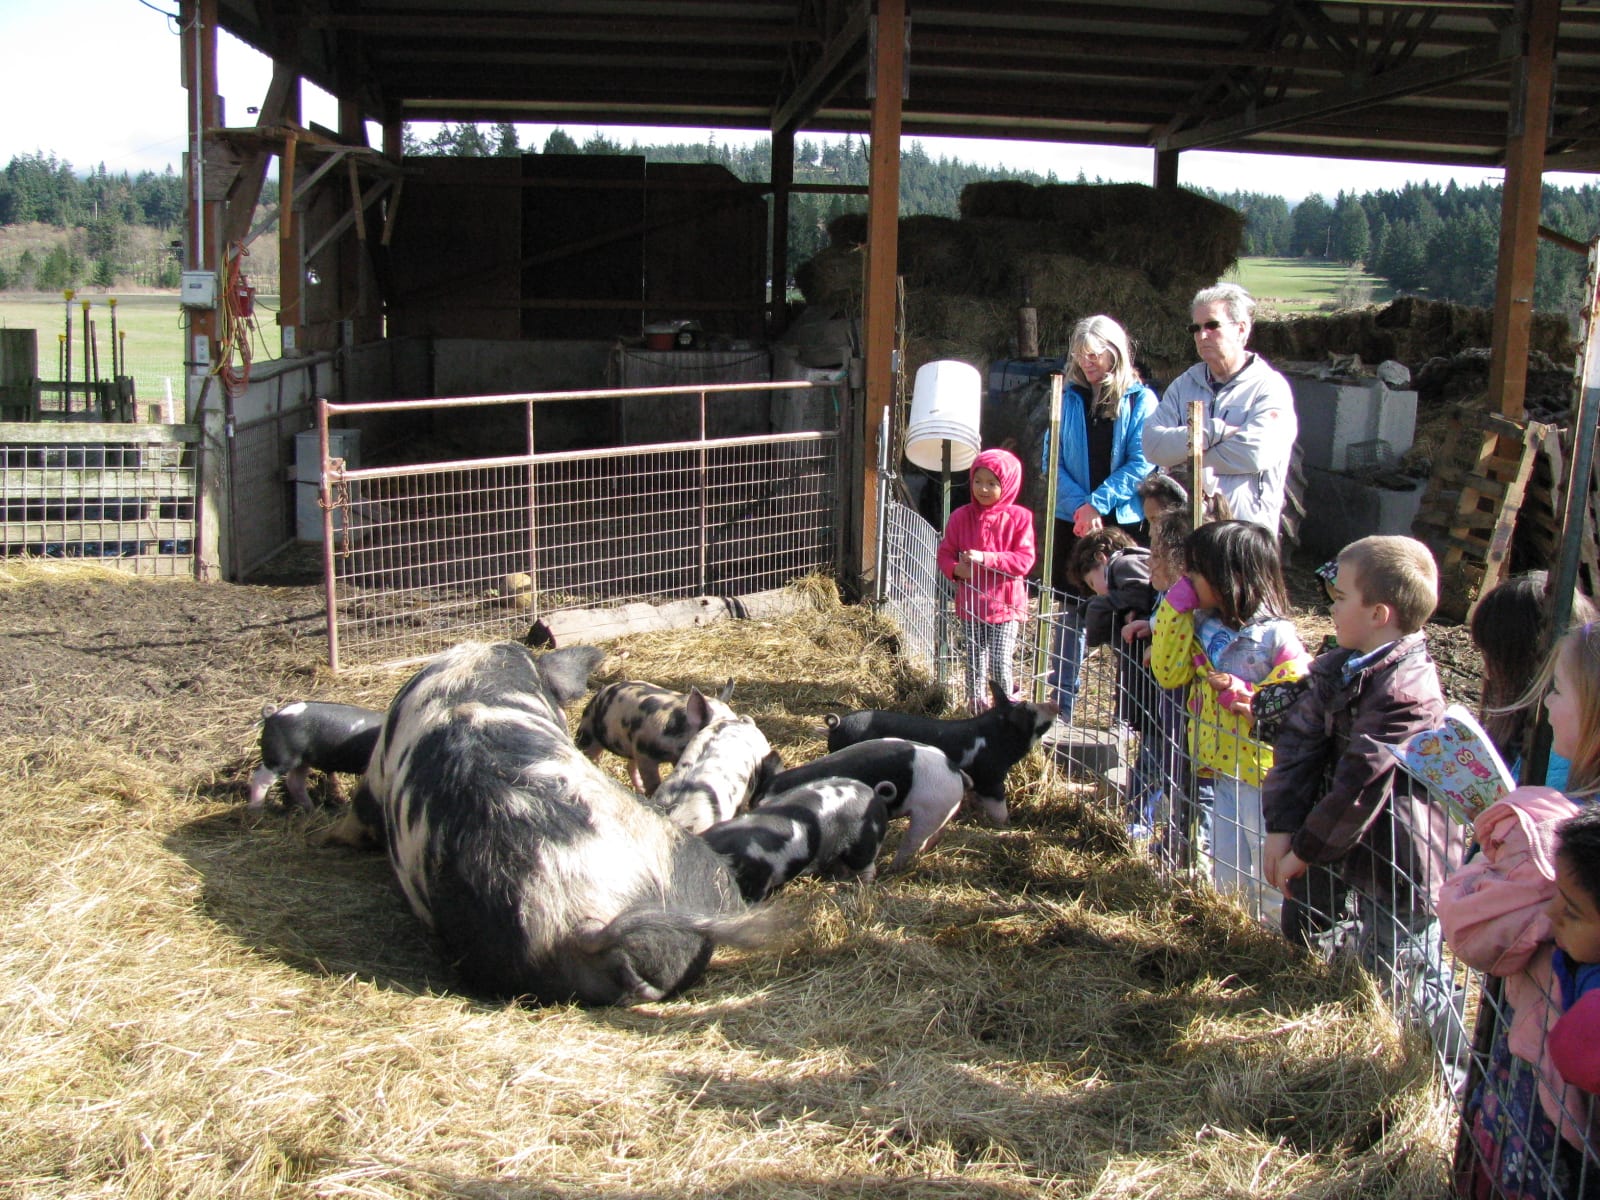 Orcas Island School children enjoy a day on the farm learning about all the animals and what it means to be a farmer